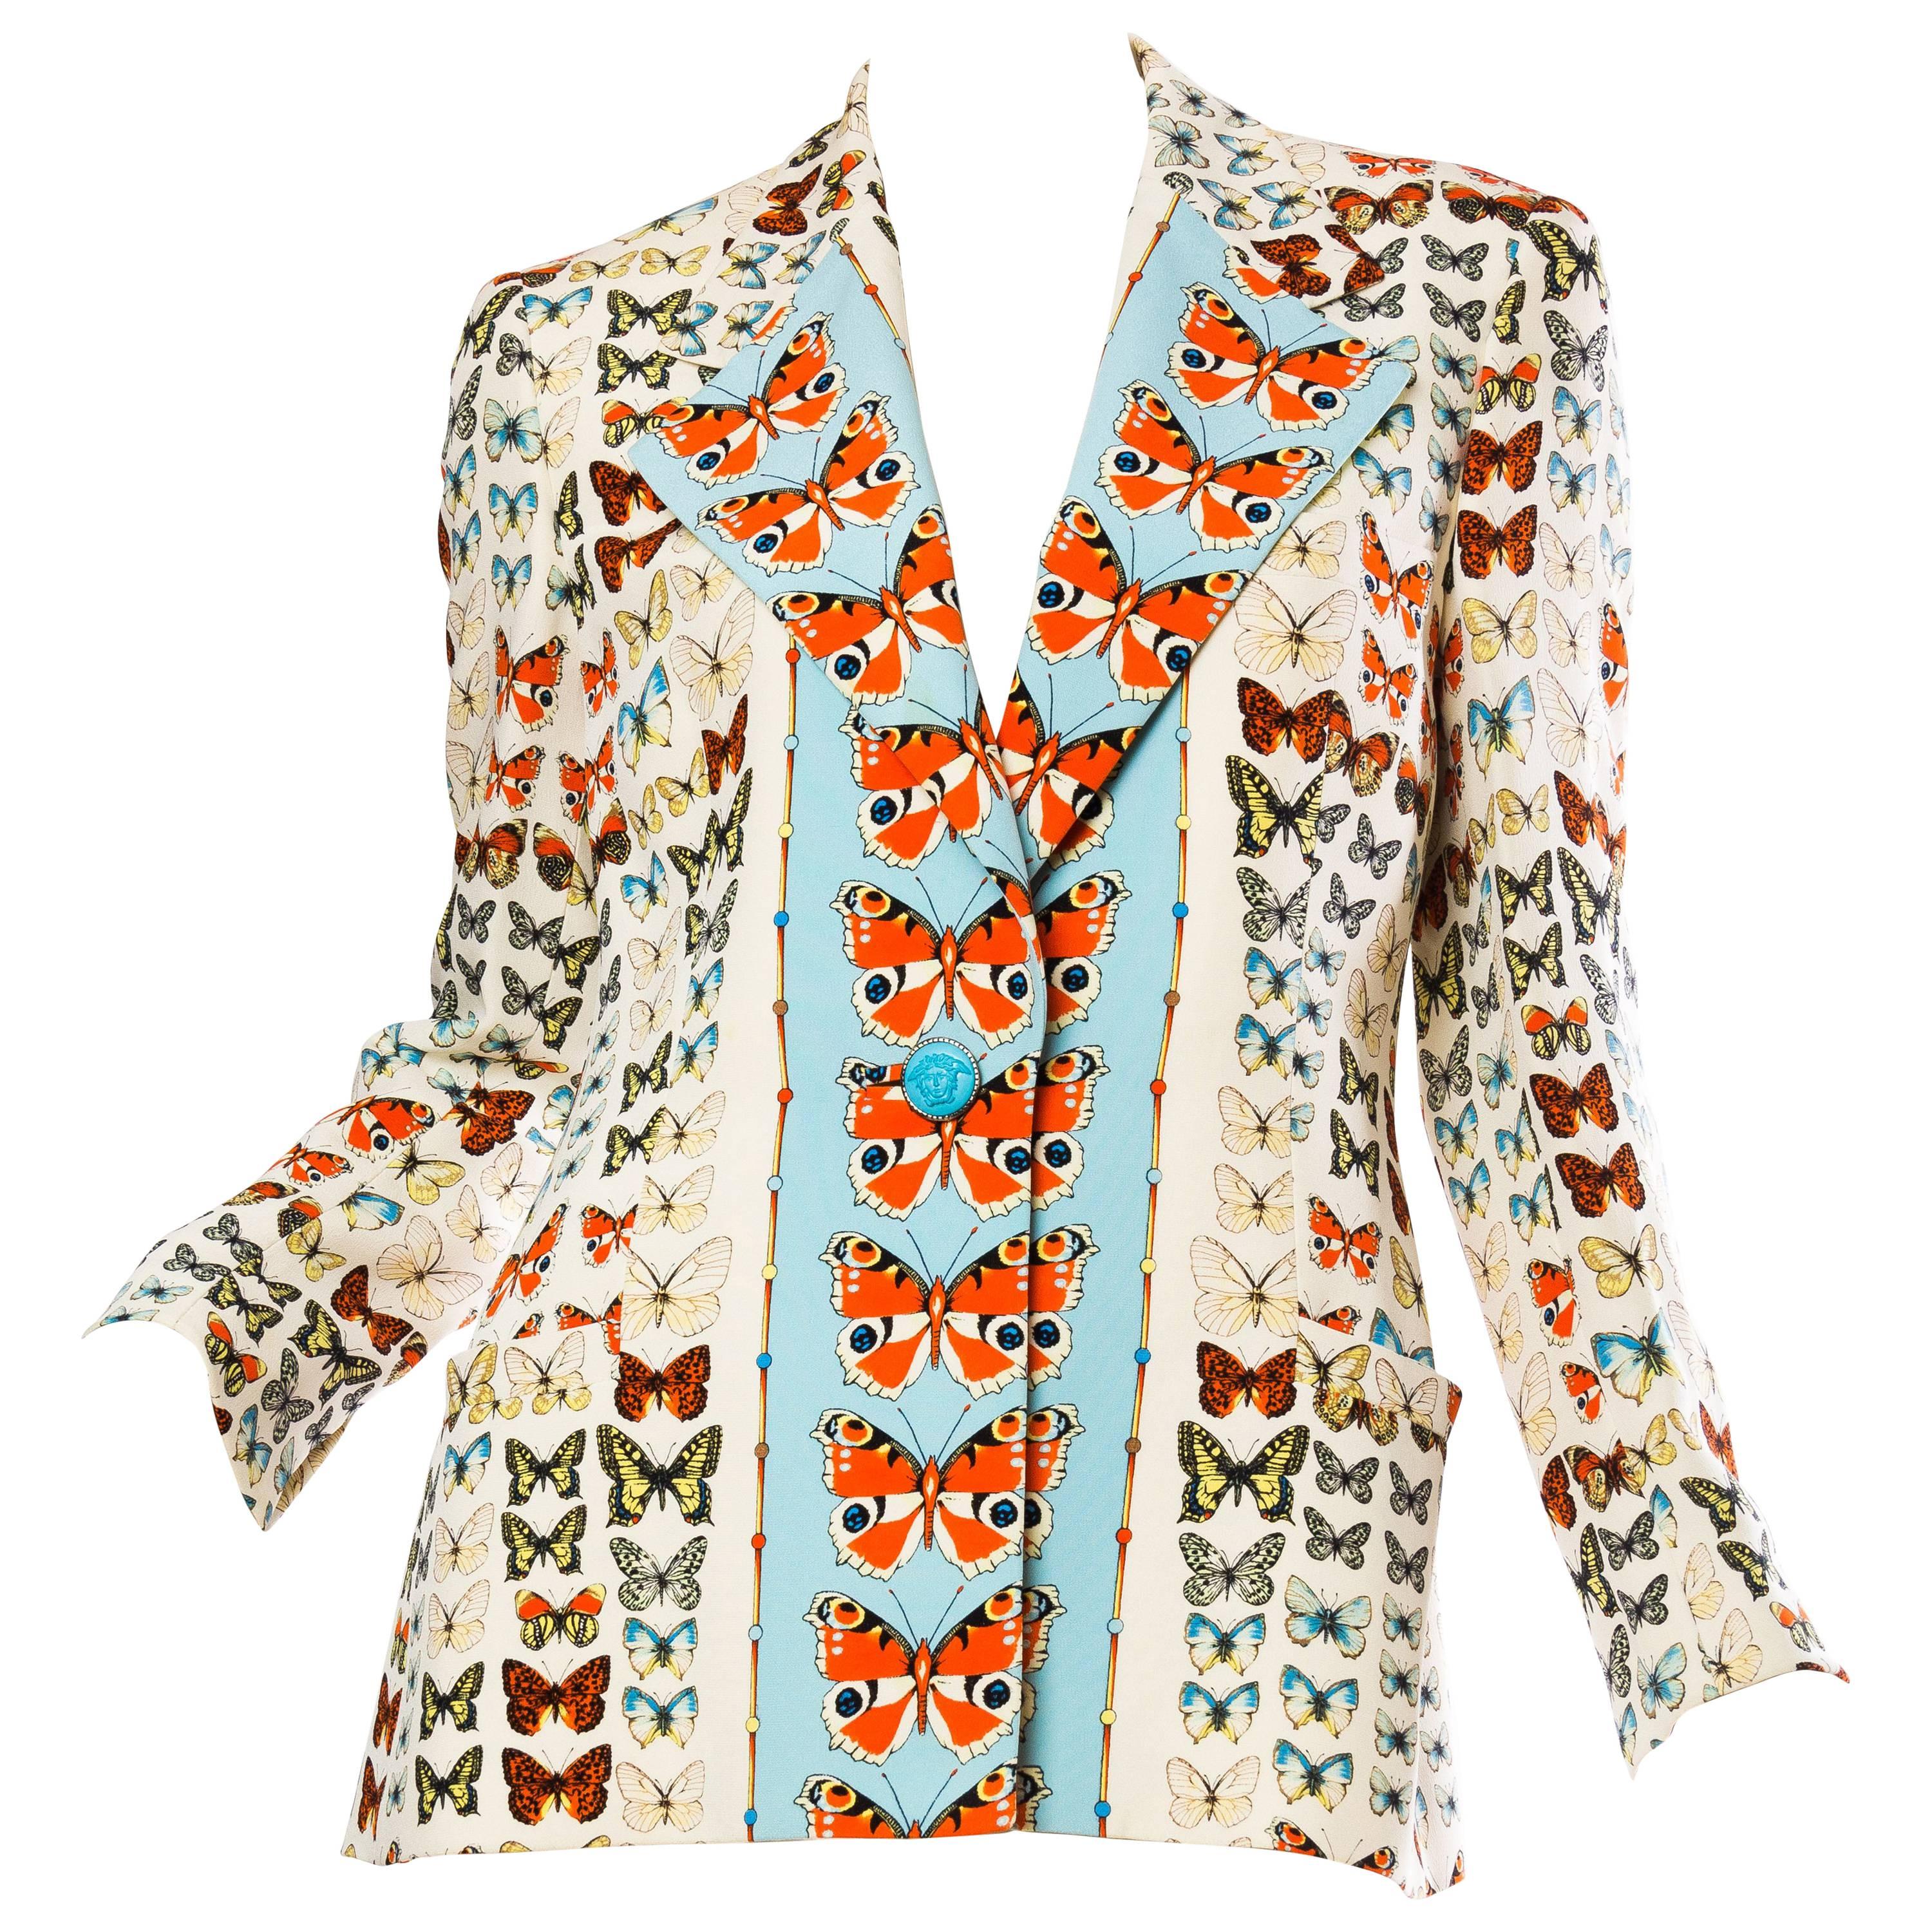 Gianni Versace Couture Butterfly Jacket